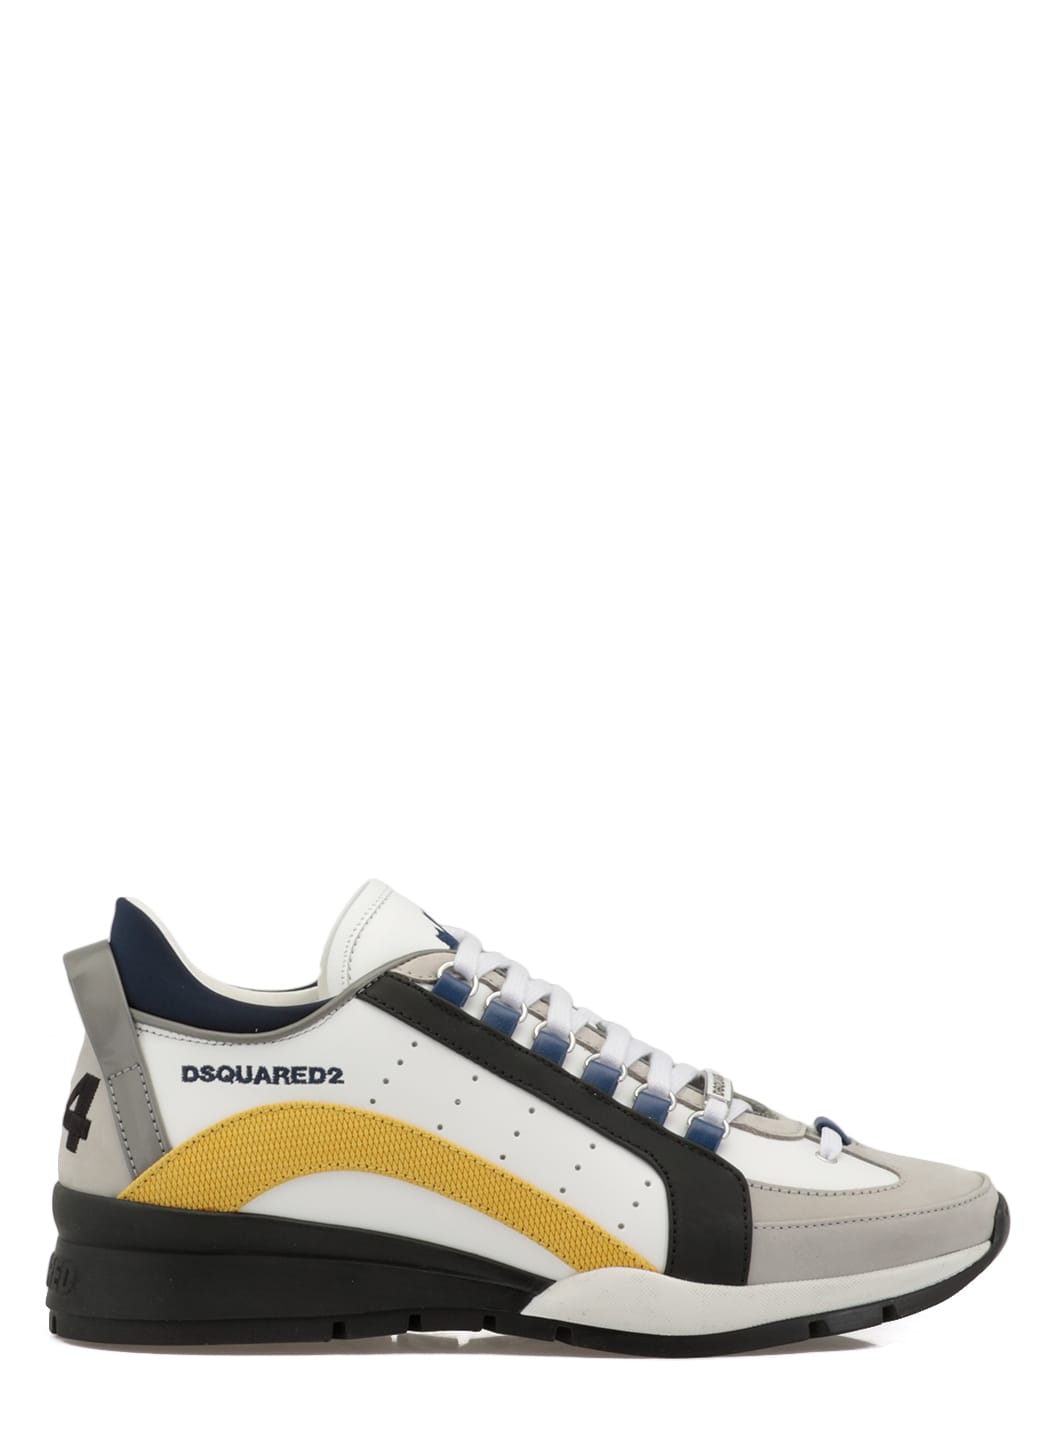 Dsquared2 Leather Dsqaured2 Sneaker